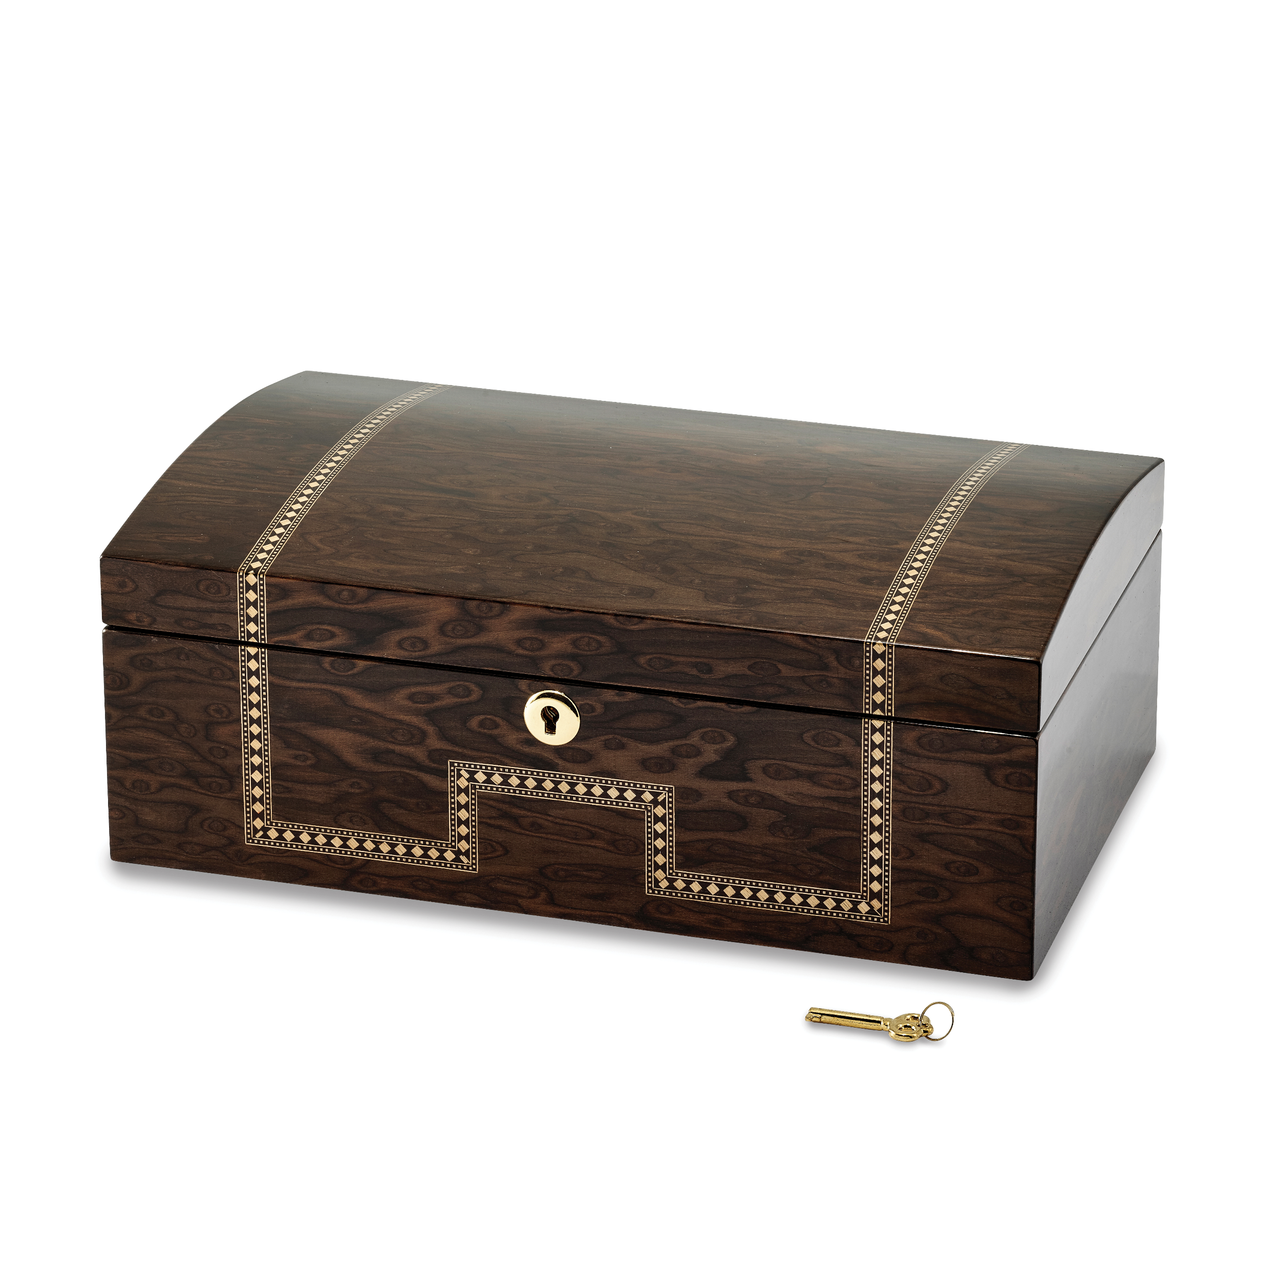 Tiger Eye Veneer with Inlay Locking Jewelry Chest by Jere